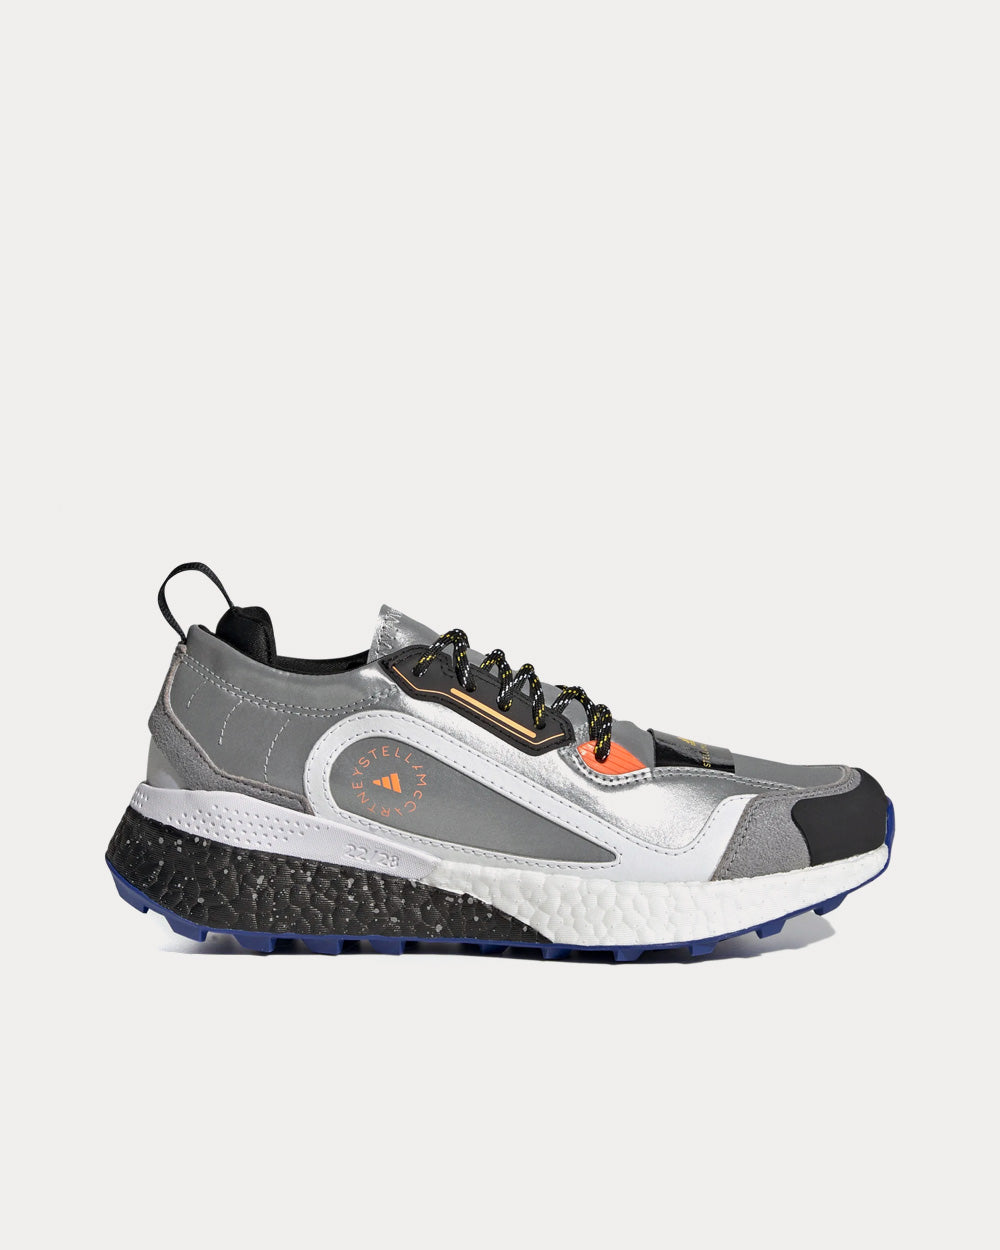 Adidas X Stella McCartney - Outdoor Boost 2.0 COLD.RDY Reflective Silver / Cloud White / Collegiate Royal Running Shoes